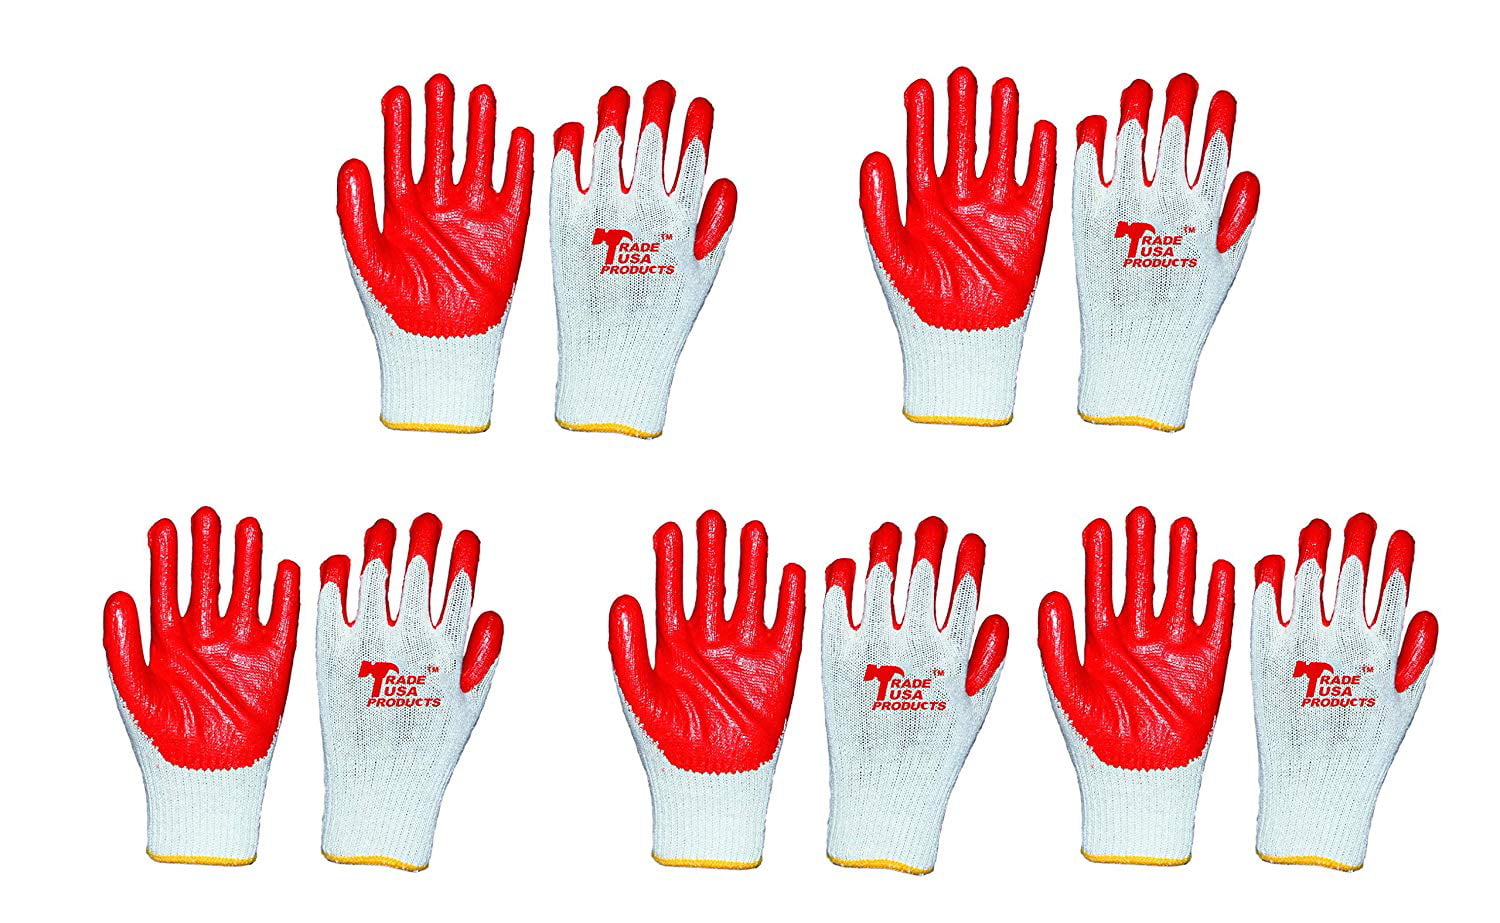 5 PAIRS RED PVC KNIT WRIST GLOVES SIZE LARGE FULLY COATED WATERPROOF HEAVY DUTY 